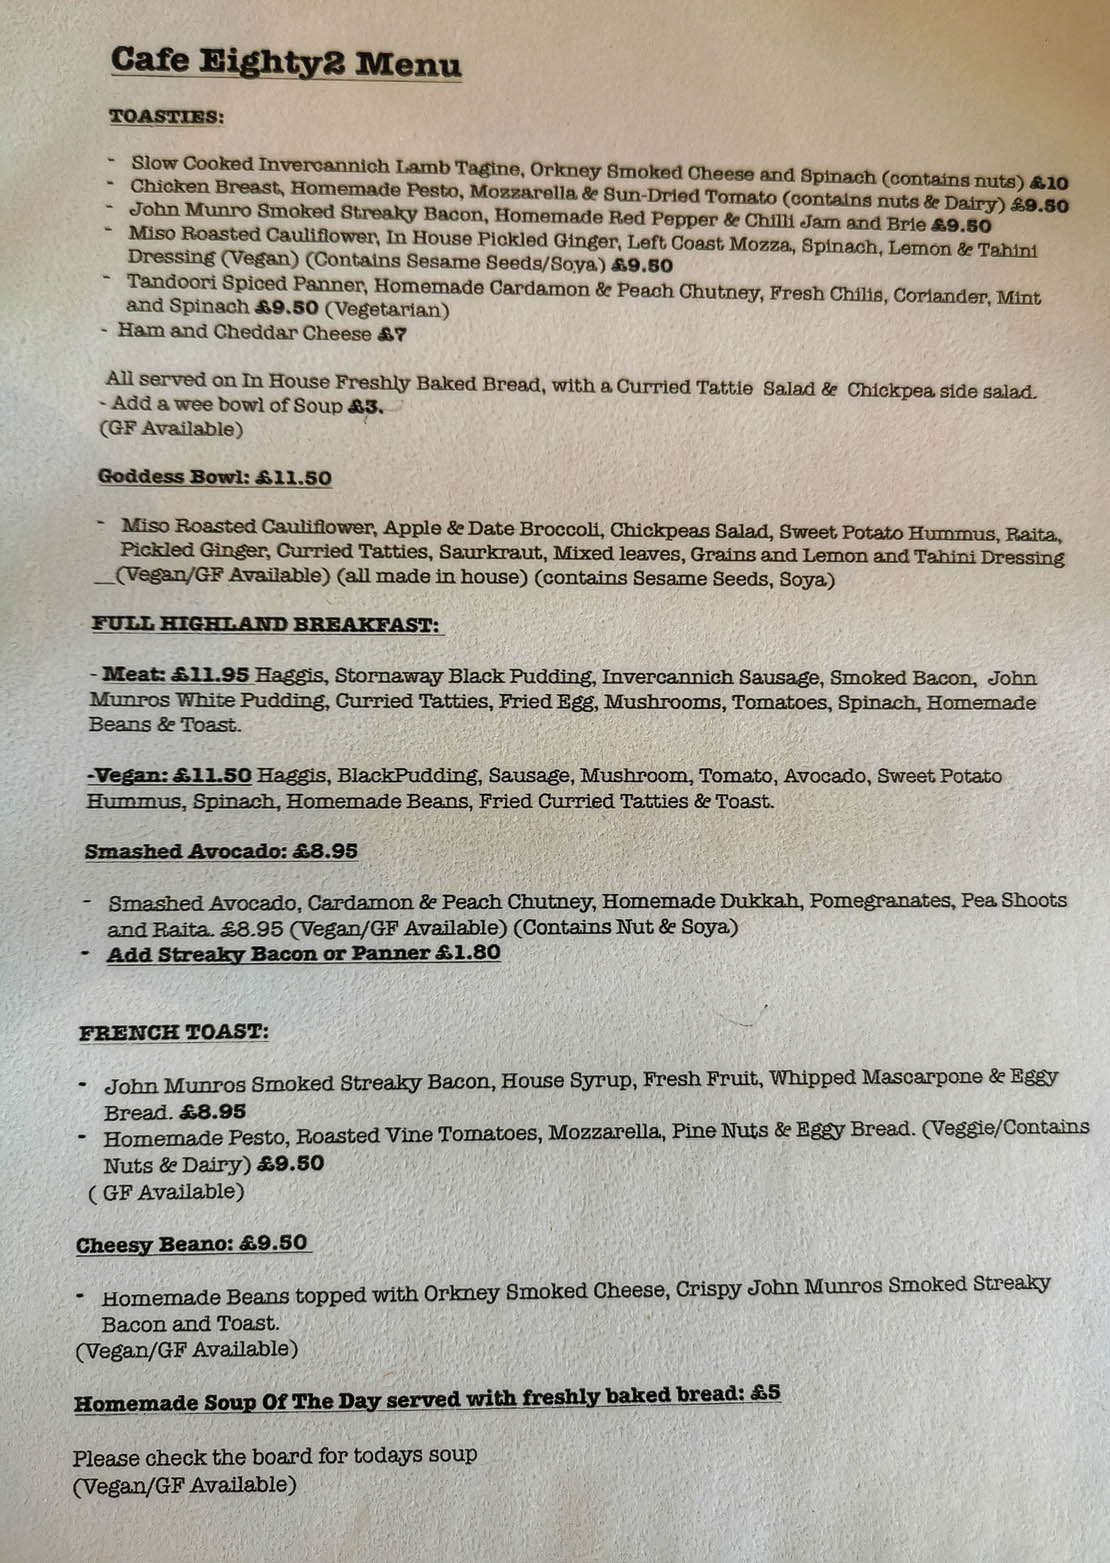 Many vegan options on the menu at Cafe Eighty2.